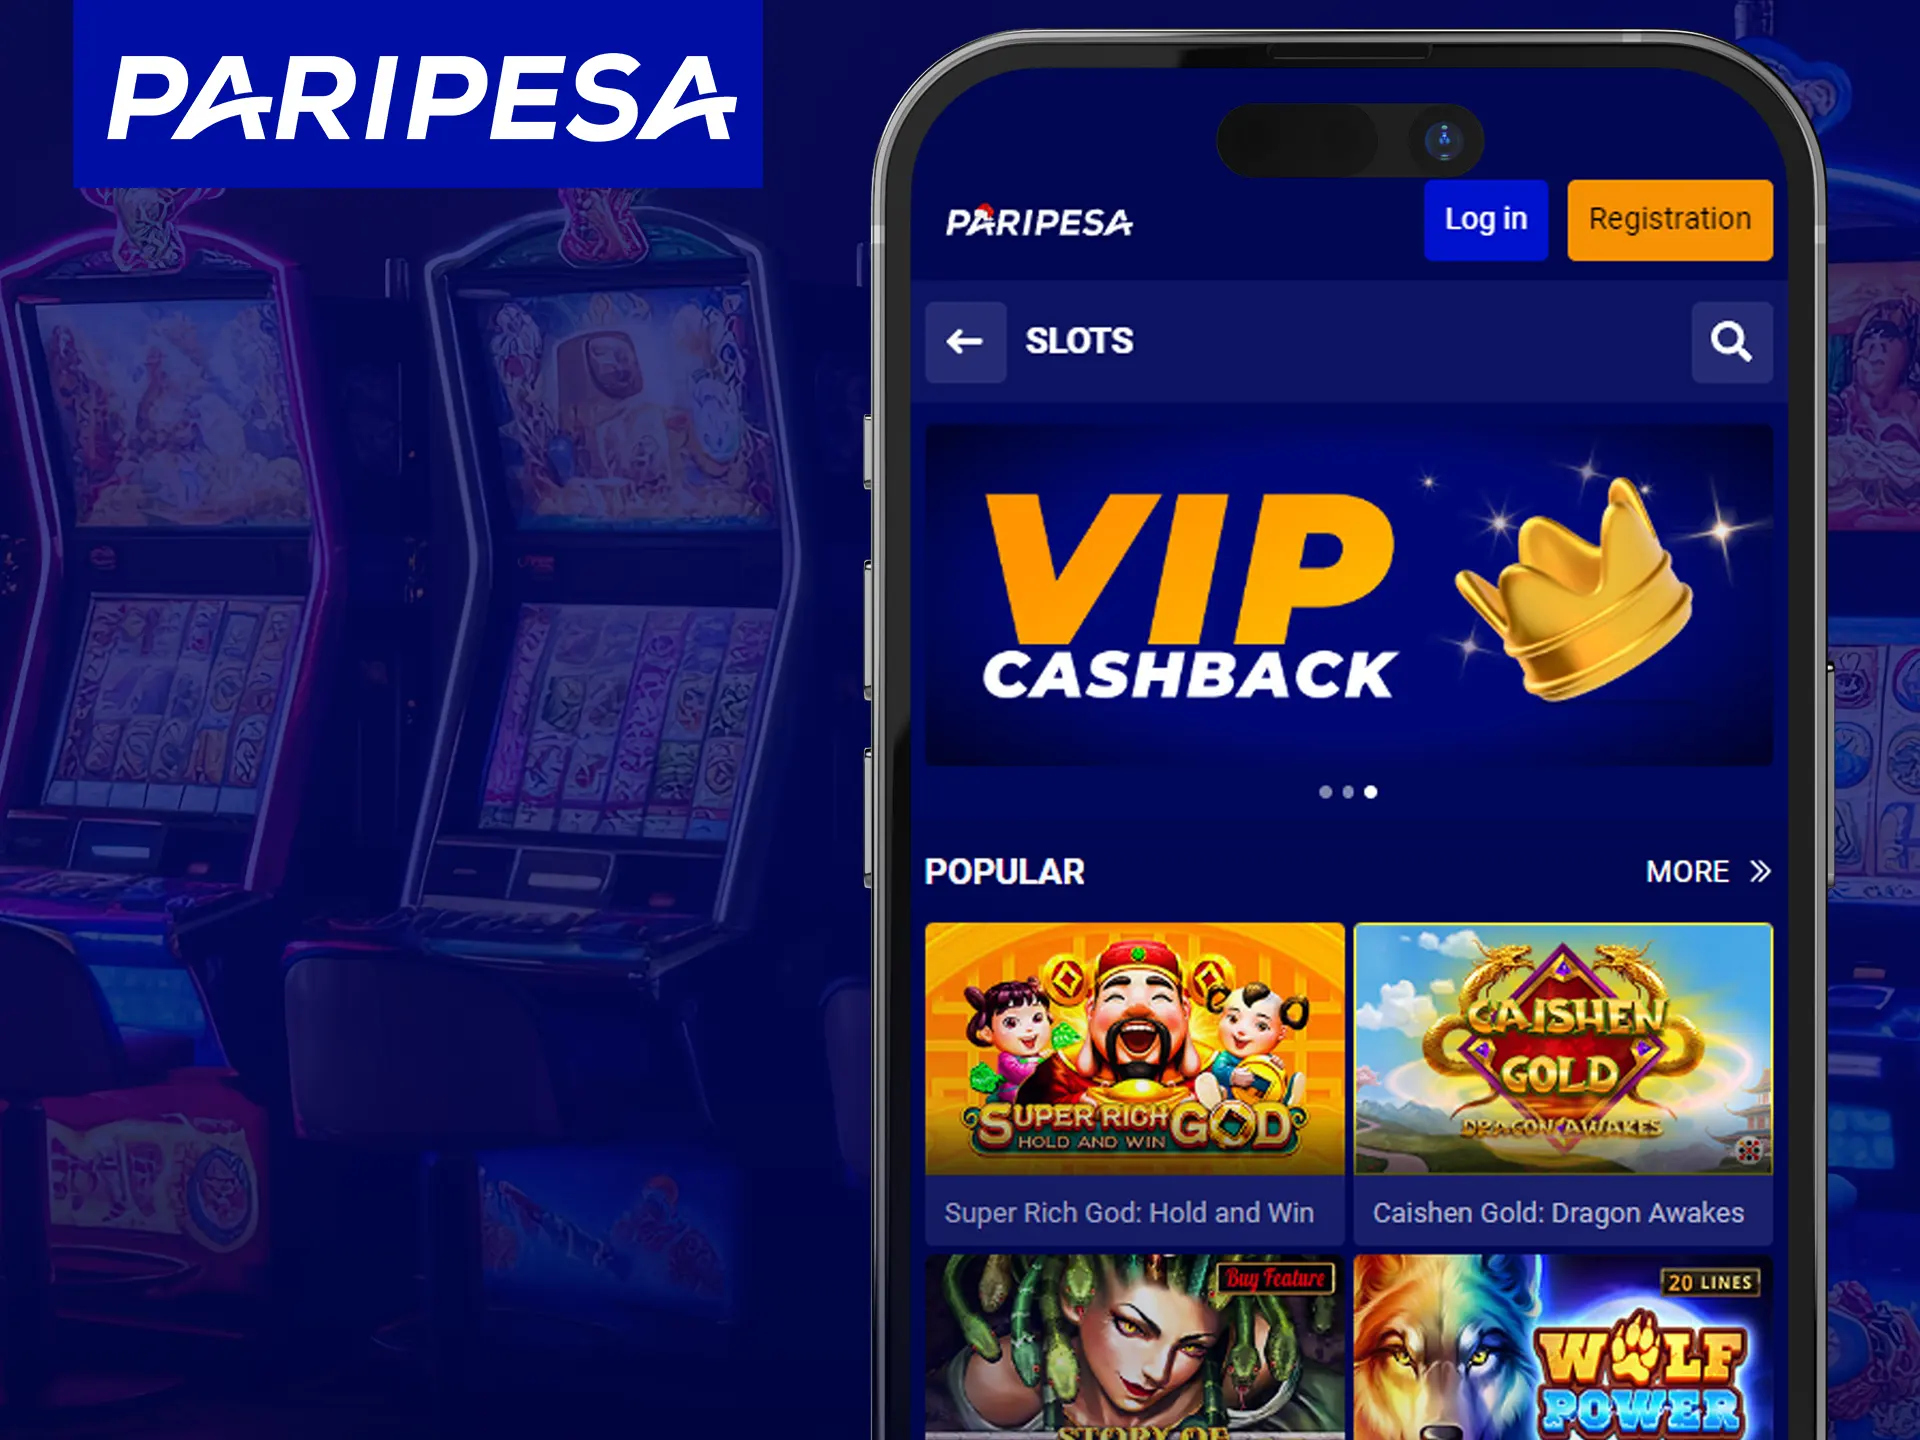 For mobile betting, access Paripesa via browser, log in or register, and use main features.